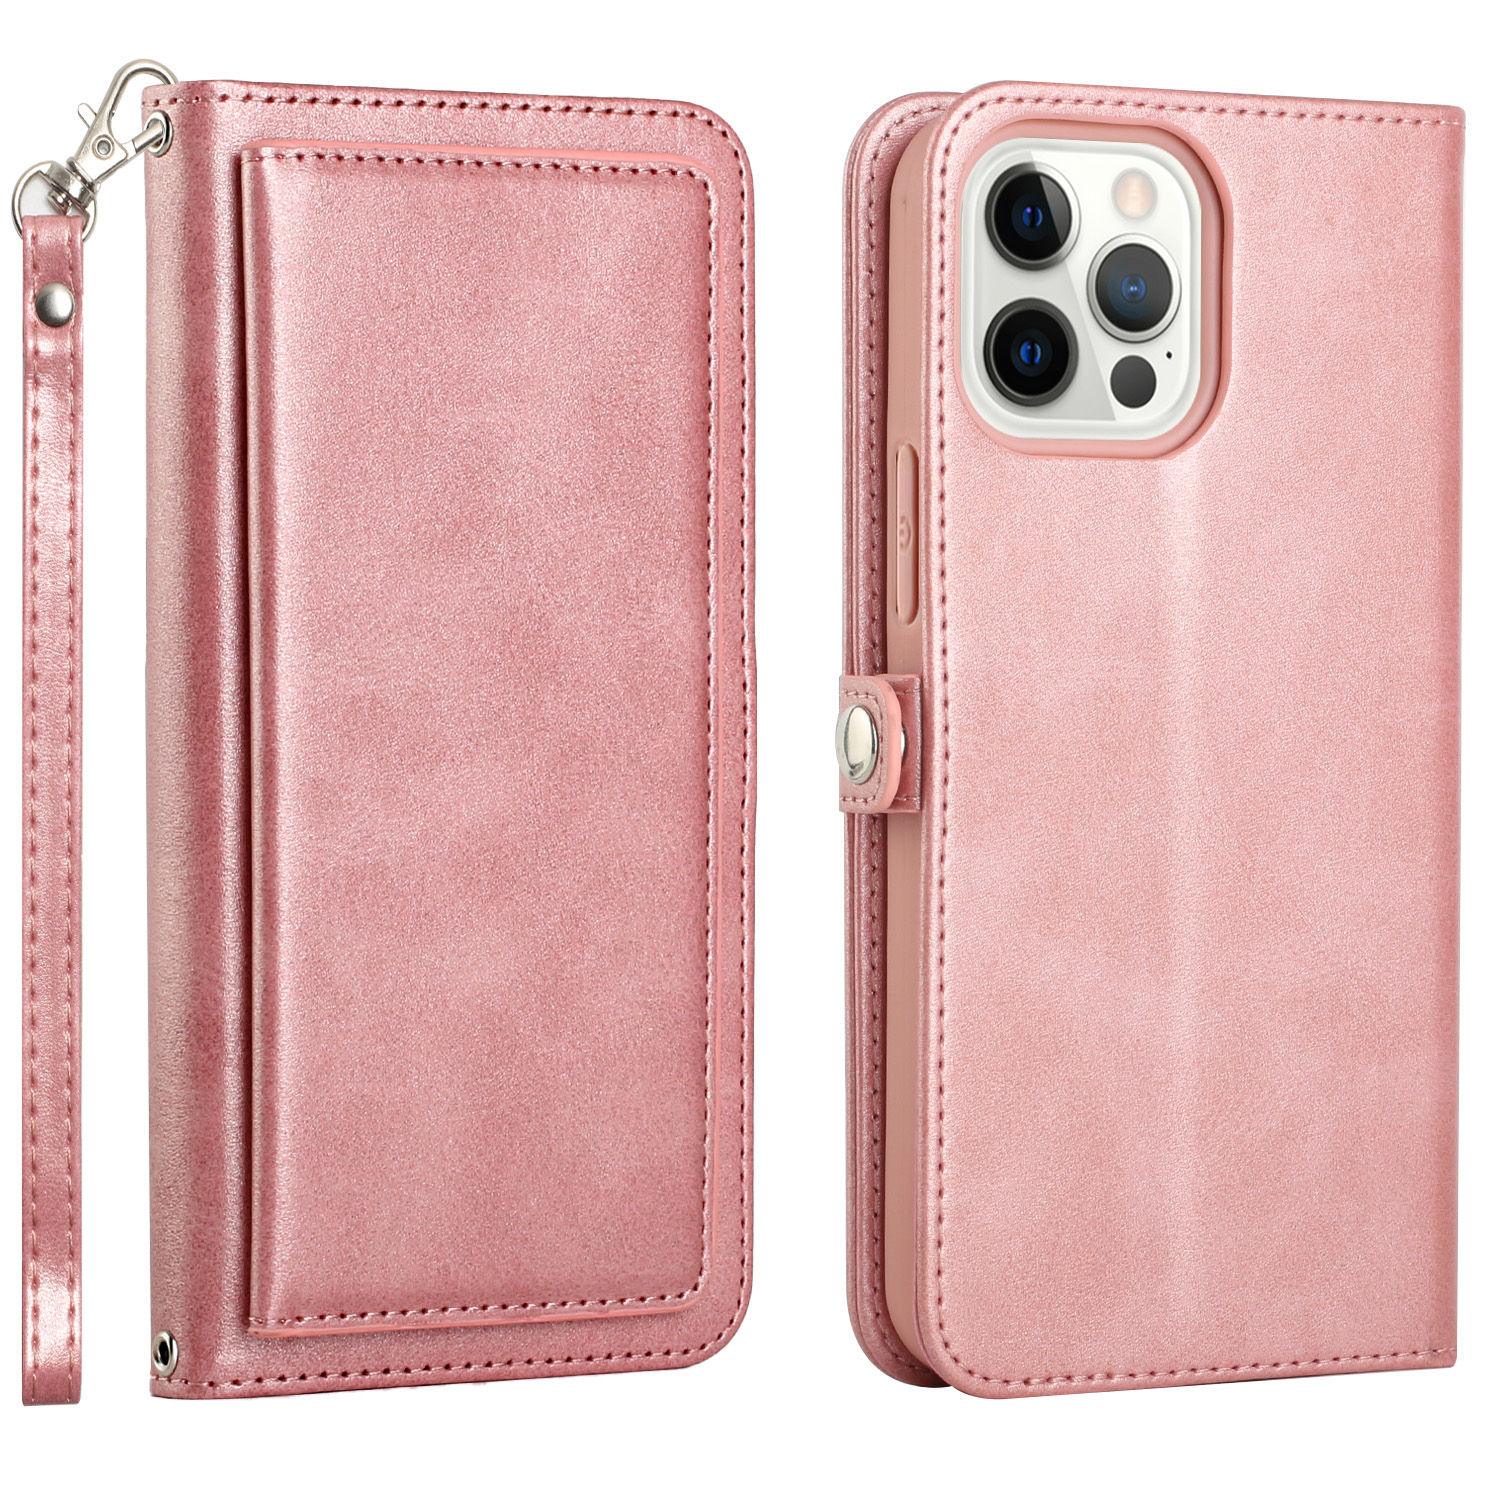 Premium LEATHER WALLET Cover Case with Card Slot for iPhone 14 Pro Max (Pink)